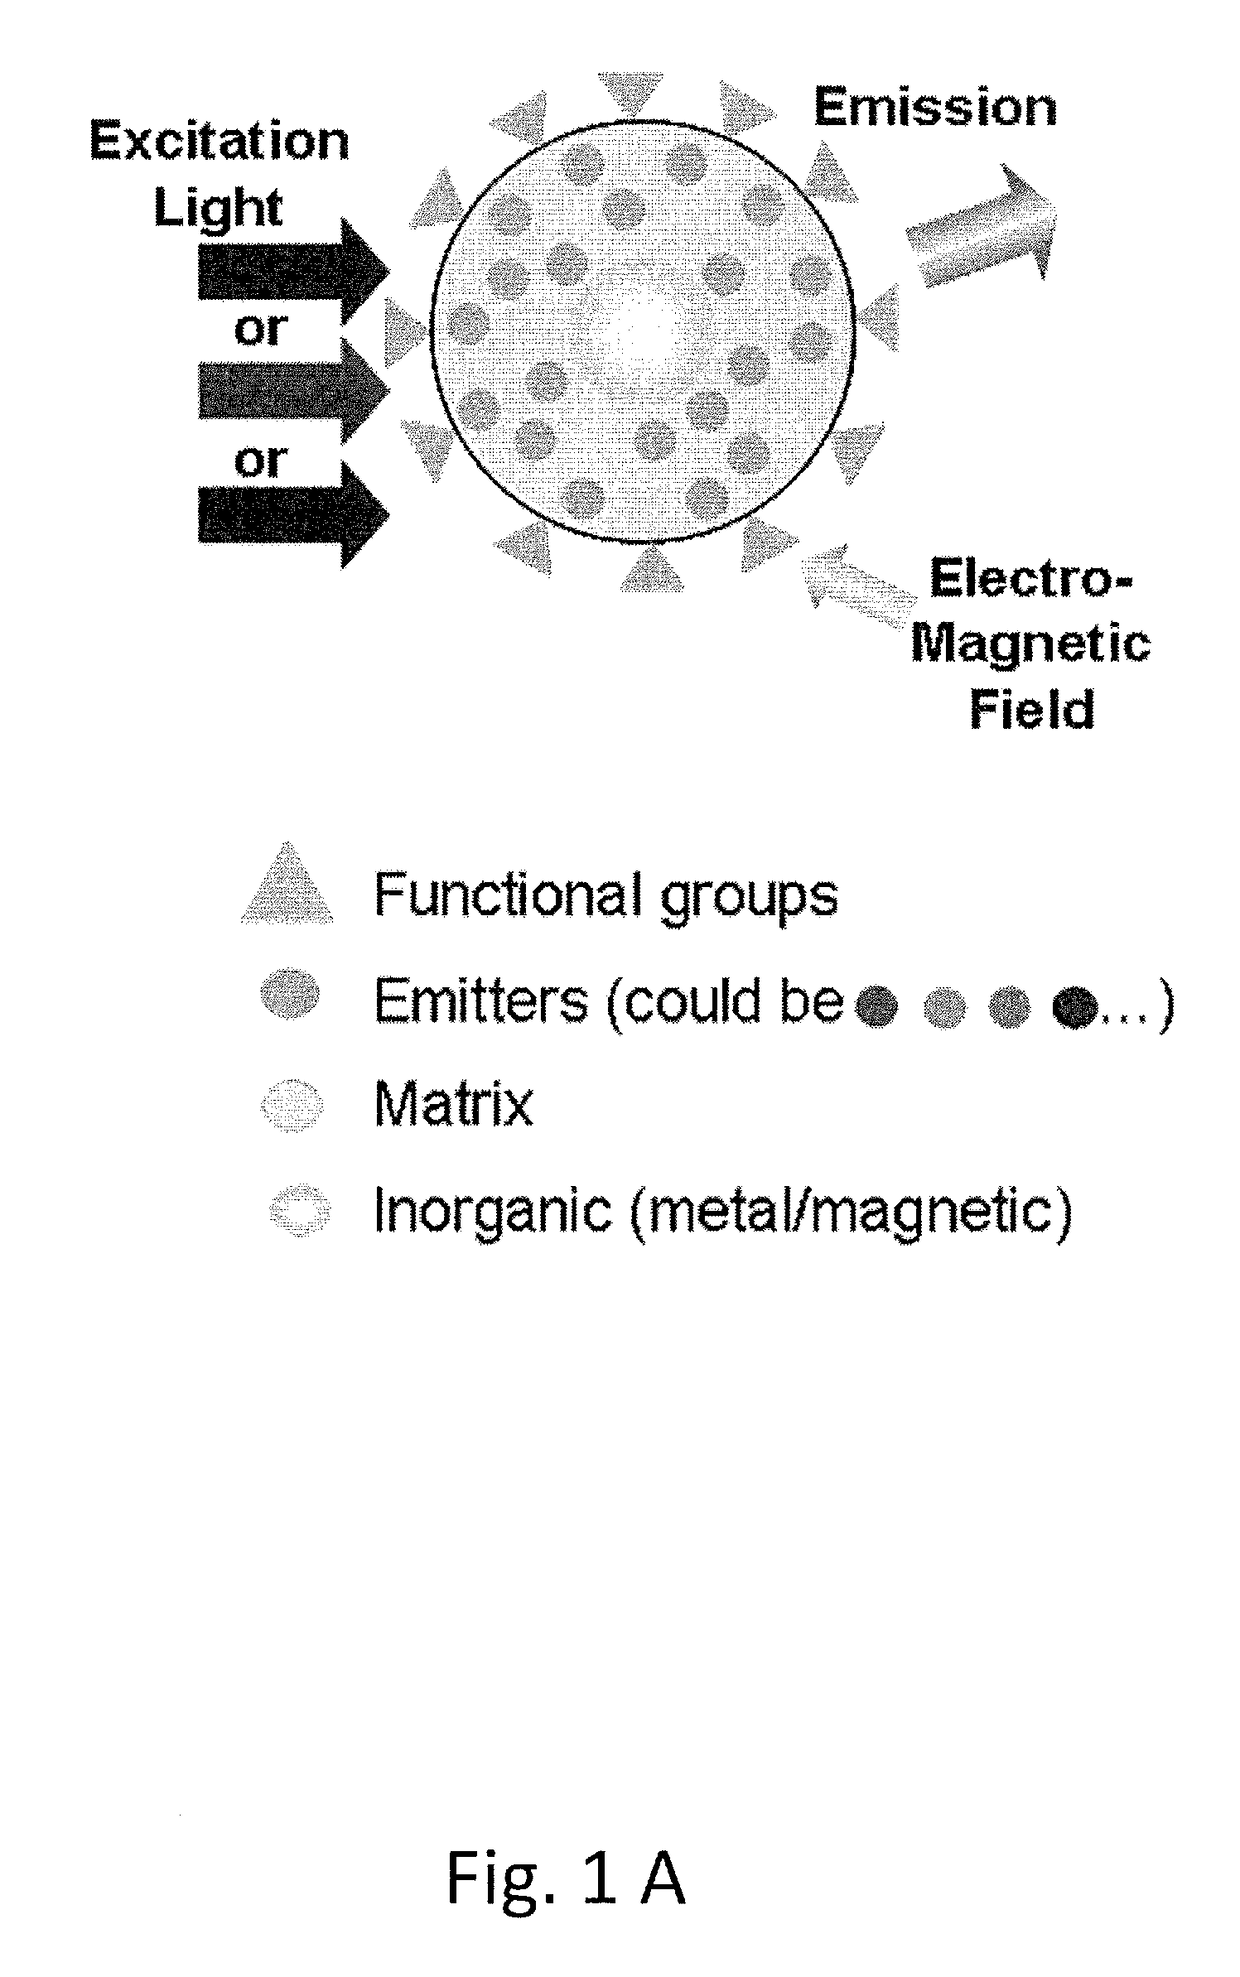 Polymeric organic nanoparticles with enhanced emission